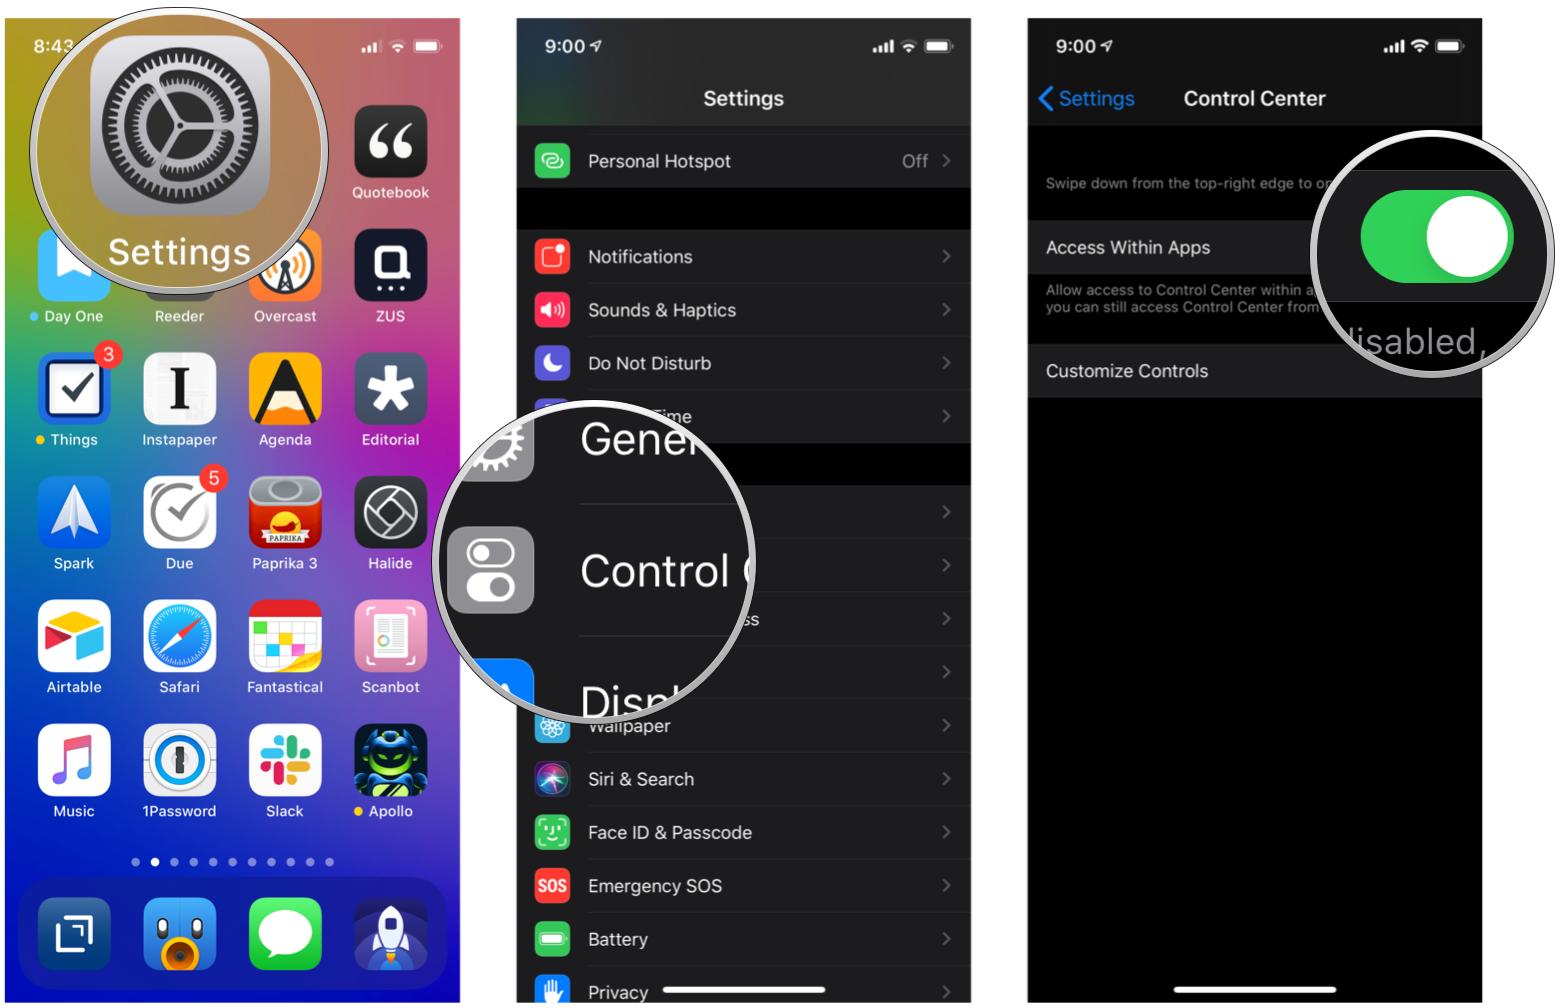  How to disable access to Control Center from within apps: Launch Settings, tap Control Center, toggle Access within Apps OFF